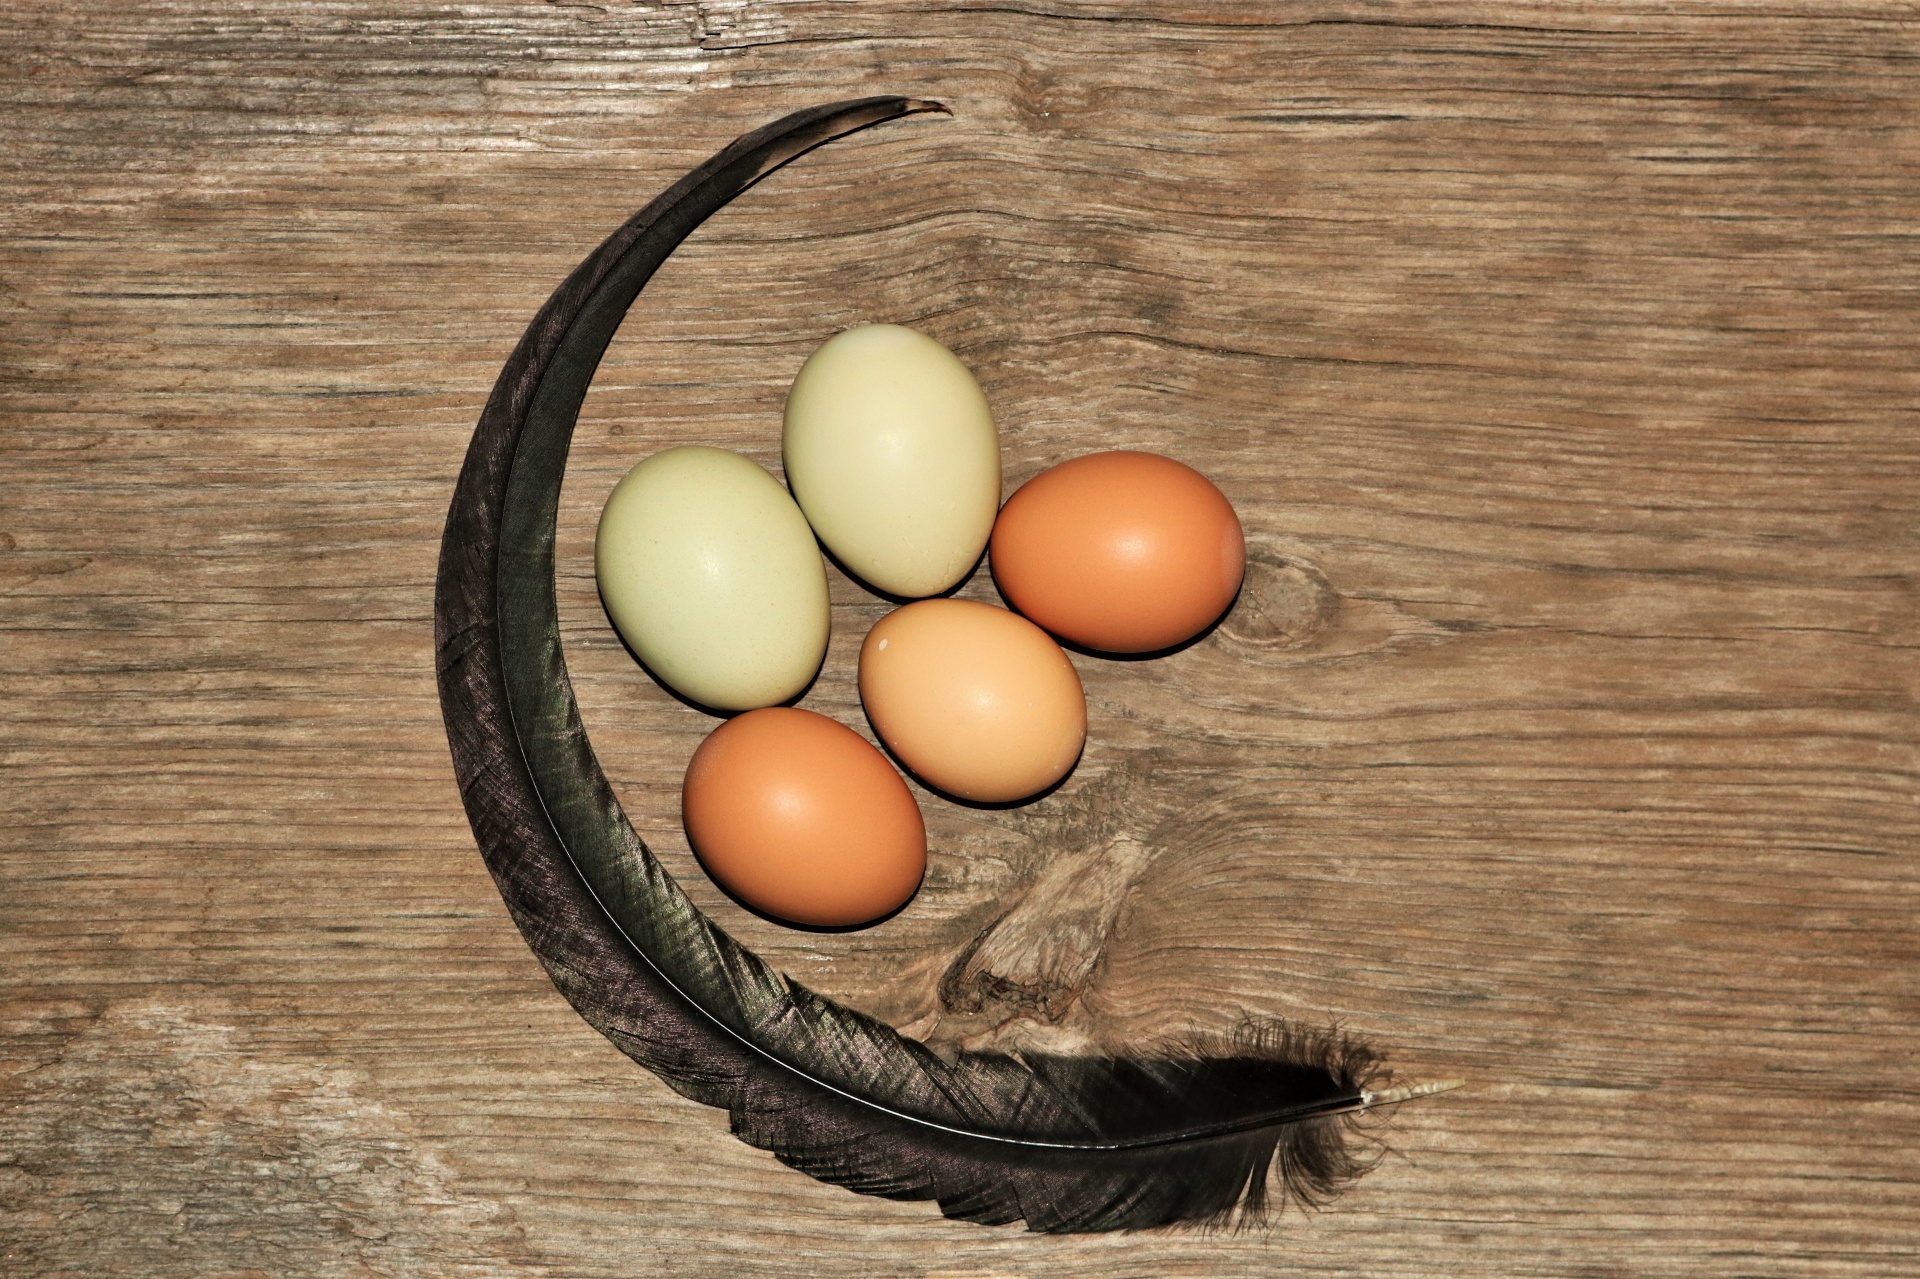 Green and brown farm fresh eggs, with a long black chicken feather curled around them, arranged on a wooden background.